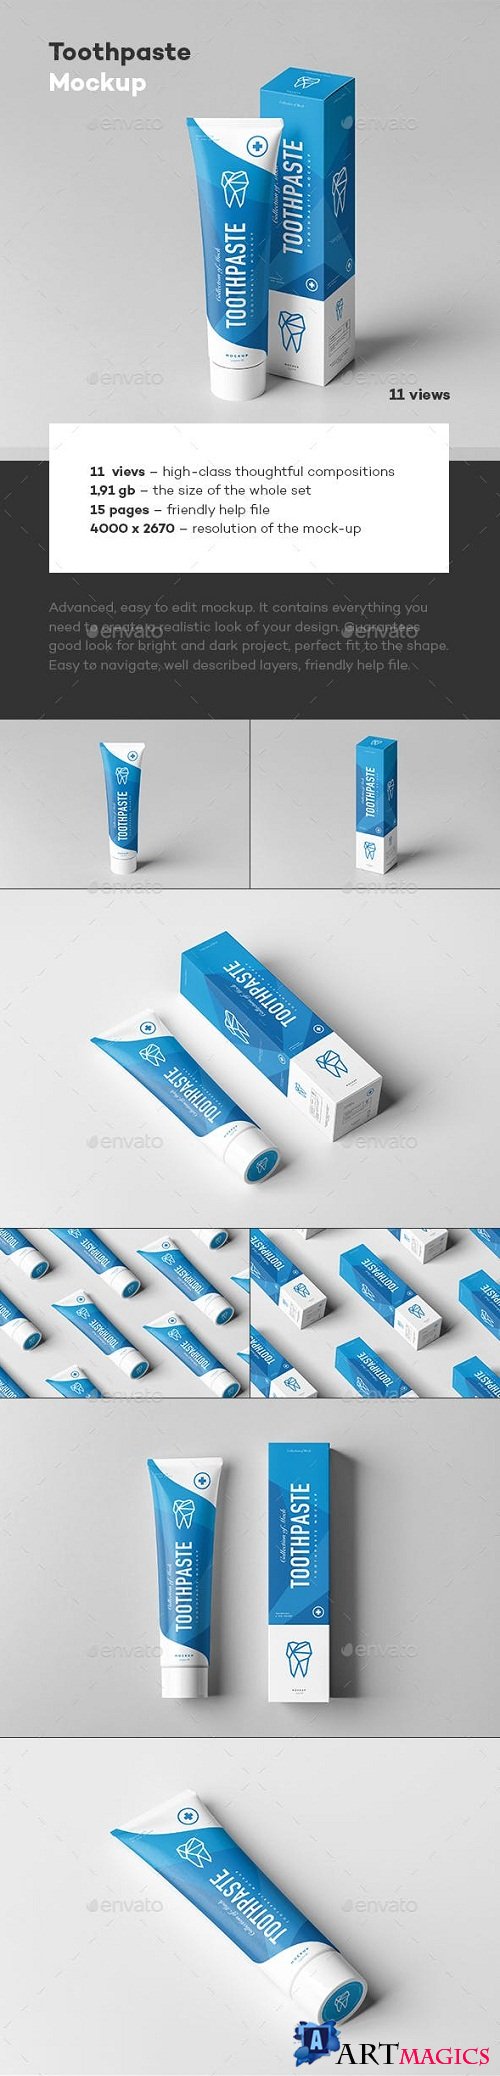 Toothpaste Mock-up - 22969957